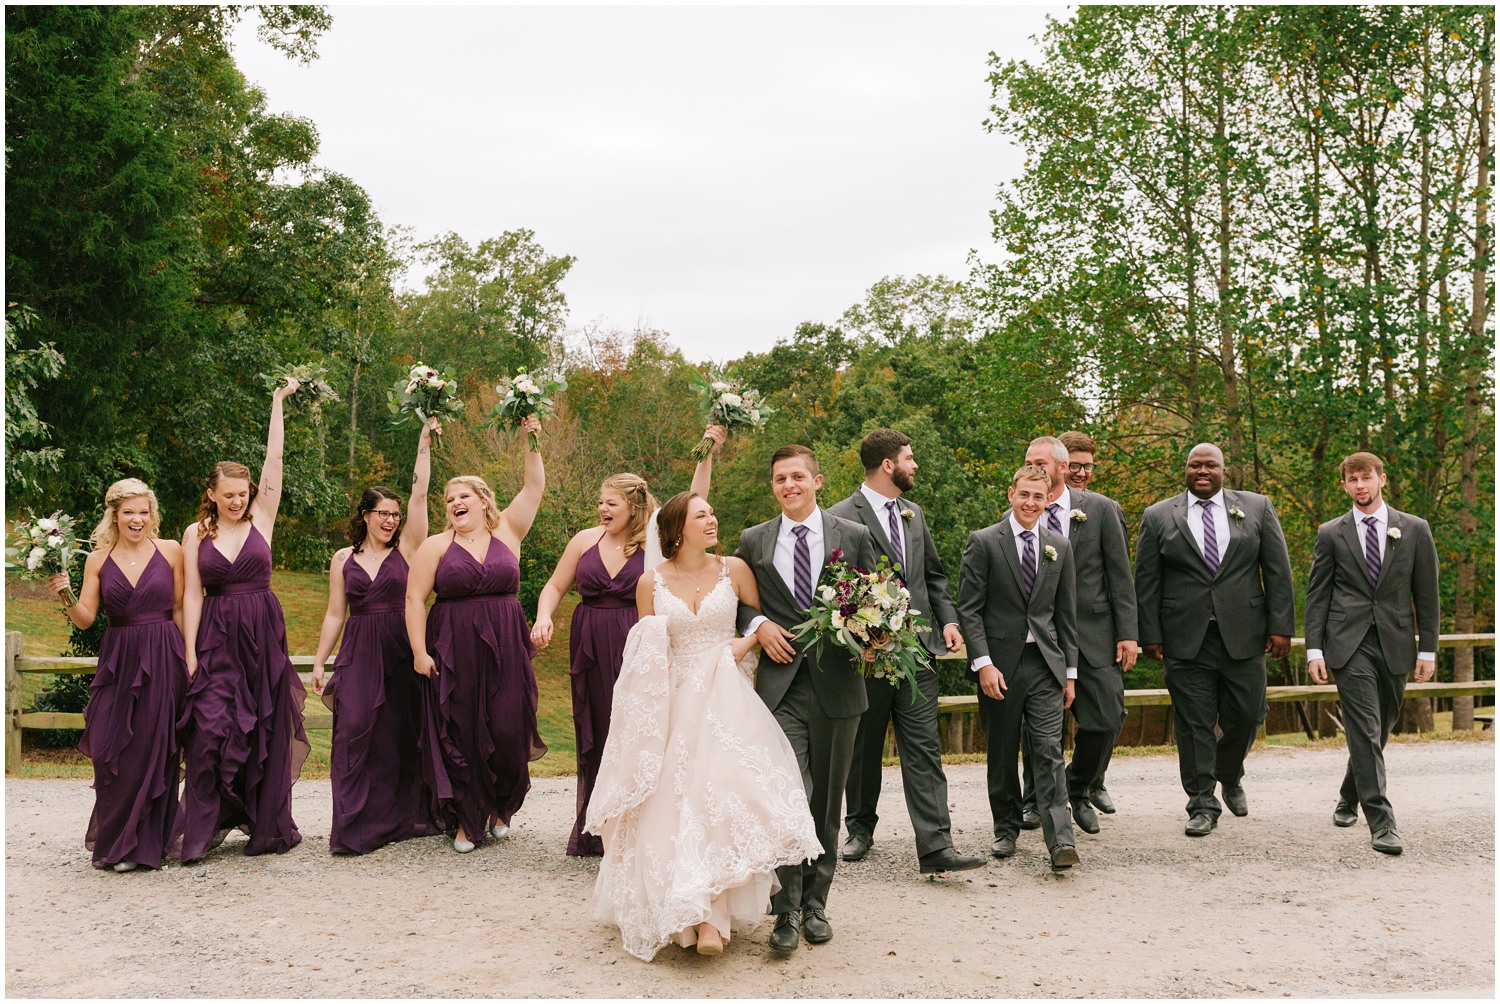 wedding party in plum dresses and grey suits walk